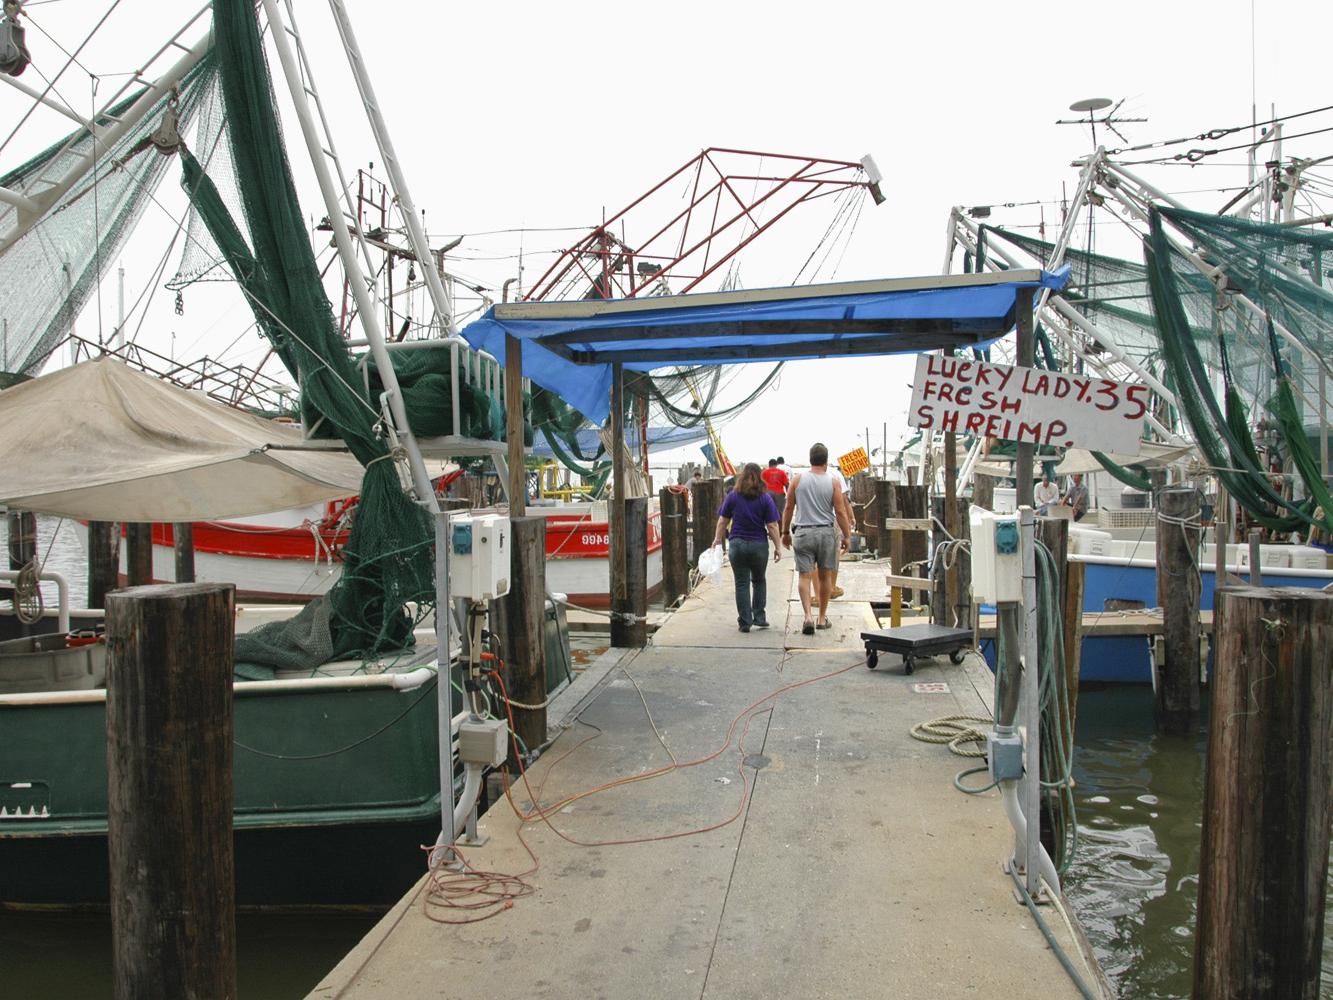 Shrimp boats line the public docks in Biloxi after spending the night harvesting in the Gulf. Shrimp lovers are finding good supplies, but prices are up this season. (Photo by Bob Ratliff)